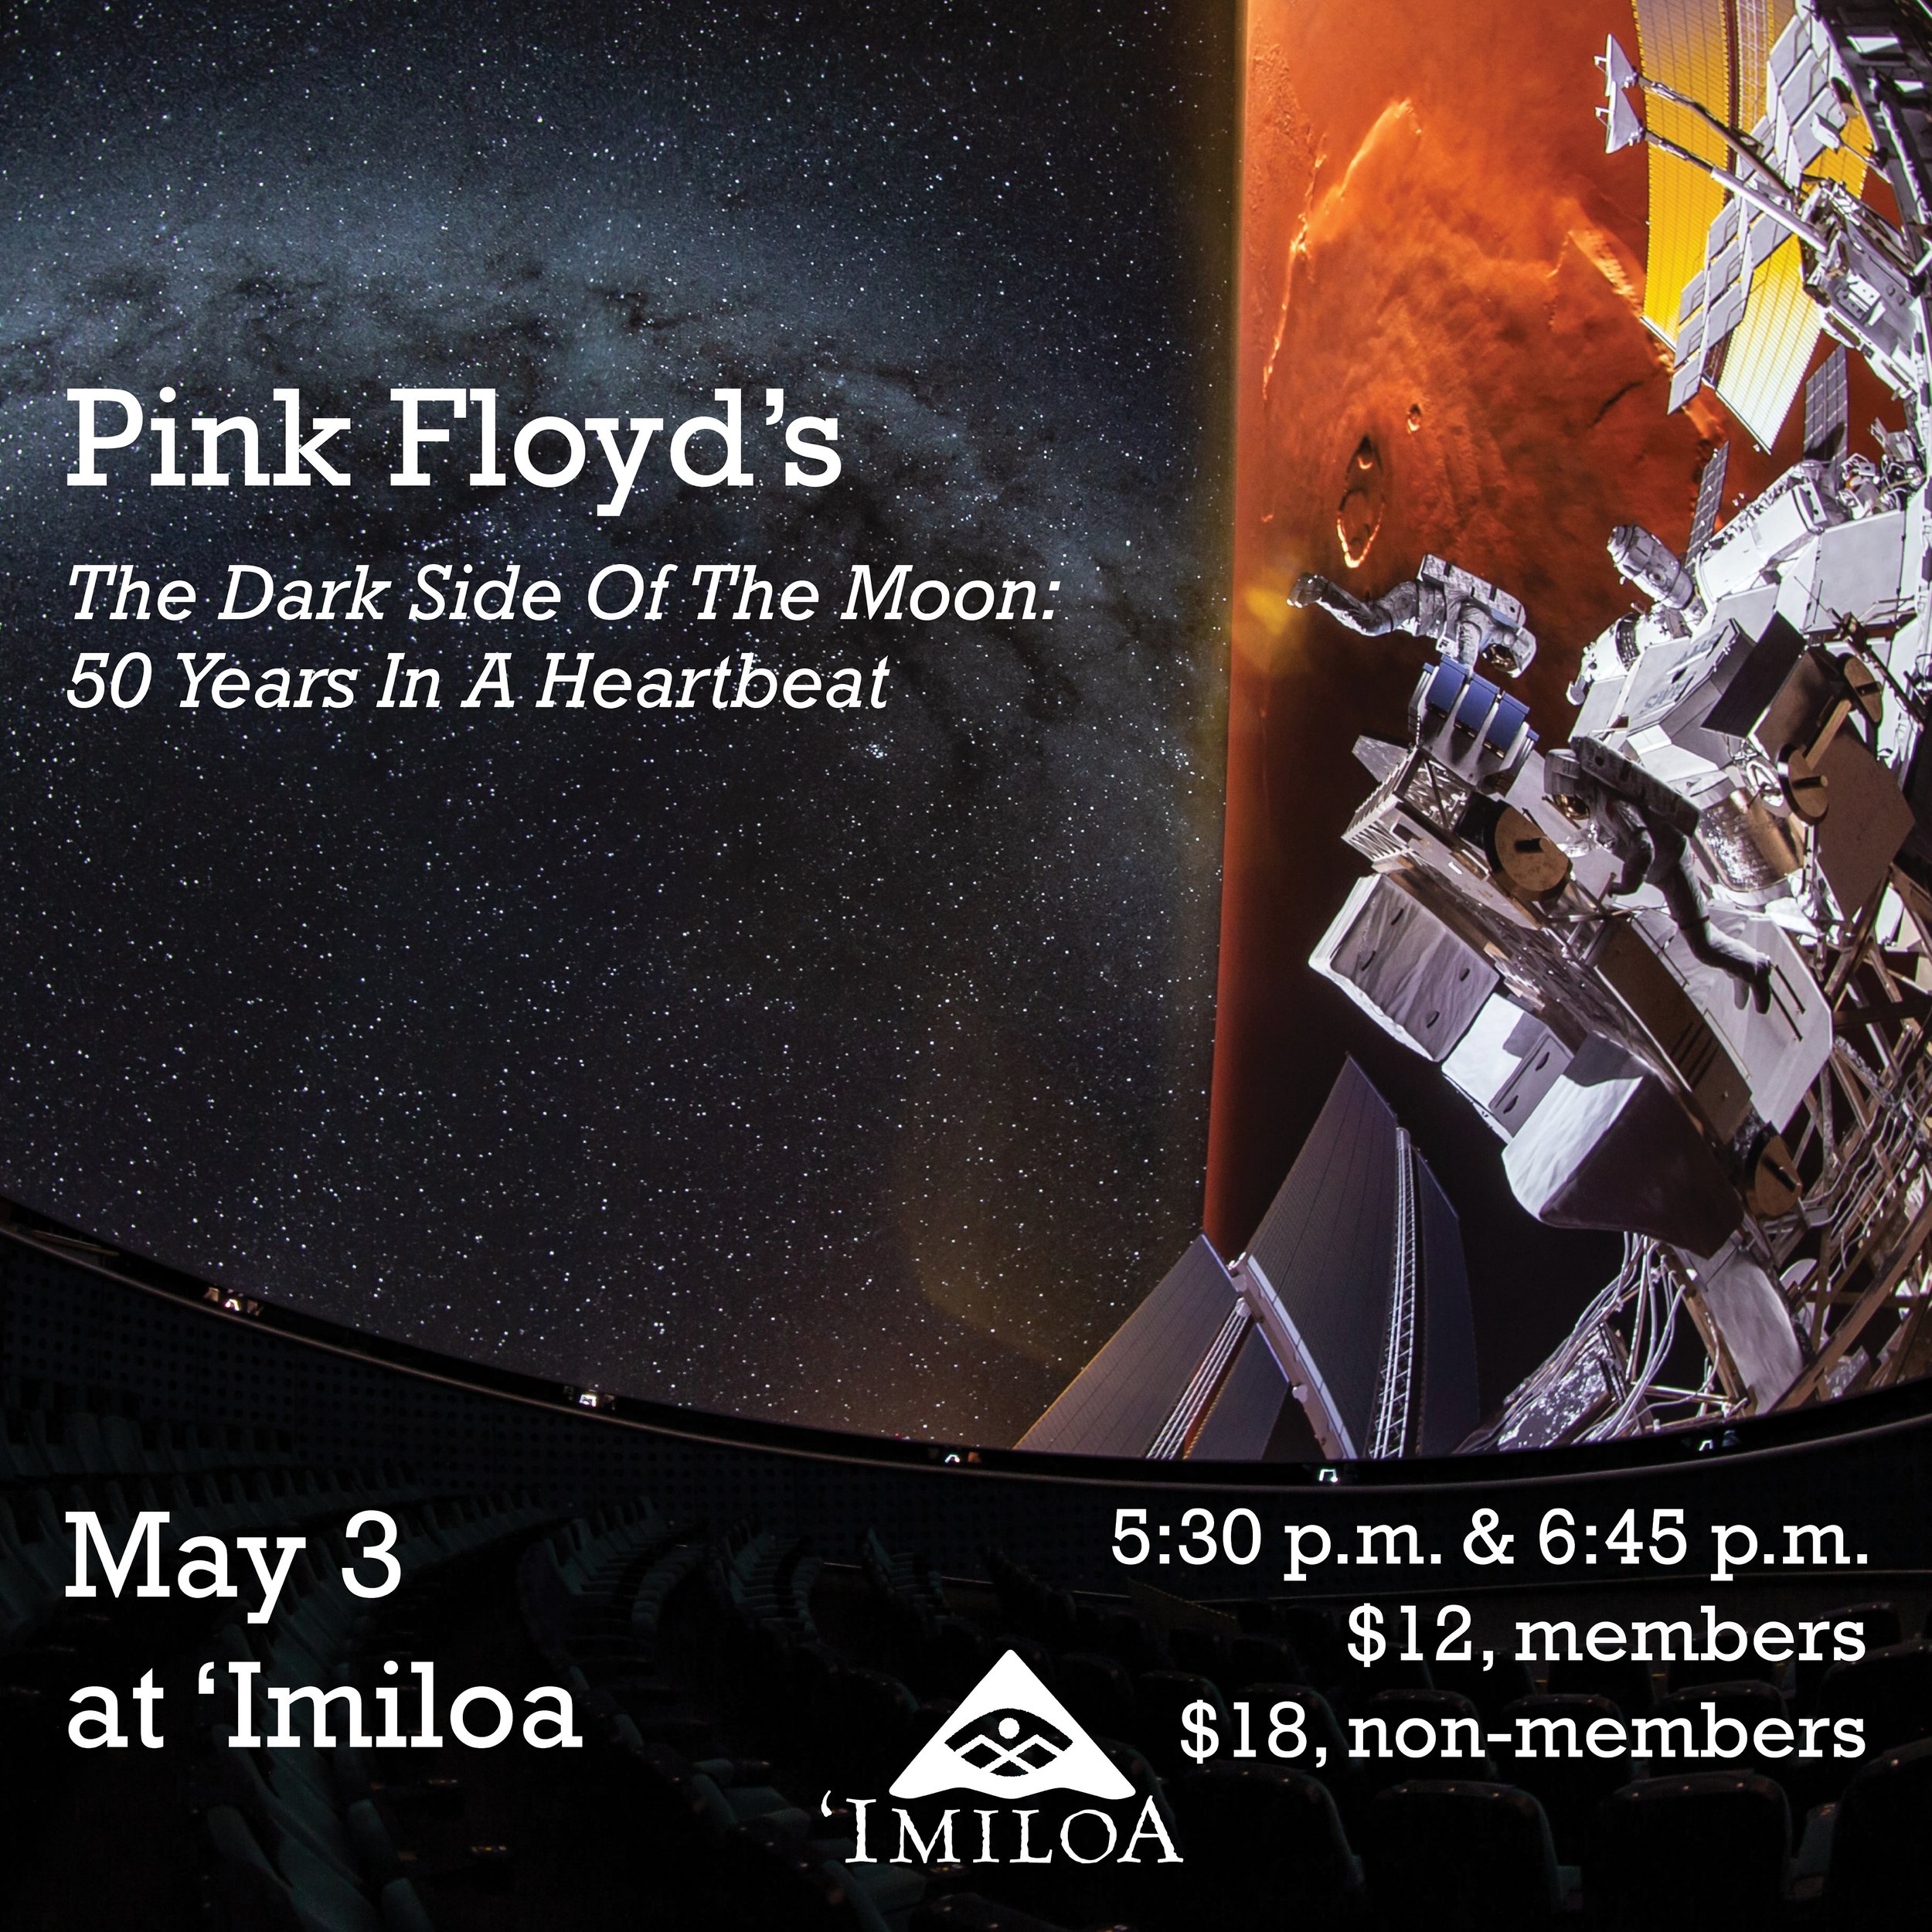 Pink Floyd&rsquo;s The Dark Side Of The Moon: 50 Years In A Heartbeat | Planetarium Experience at ʻImiloa 🌑🎶🎸

➡️ imiloahawaii.org (link in bio)